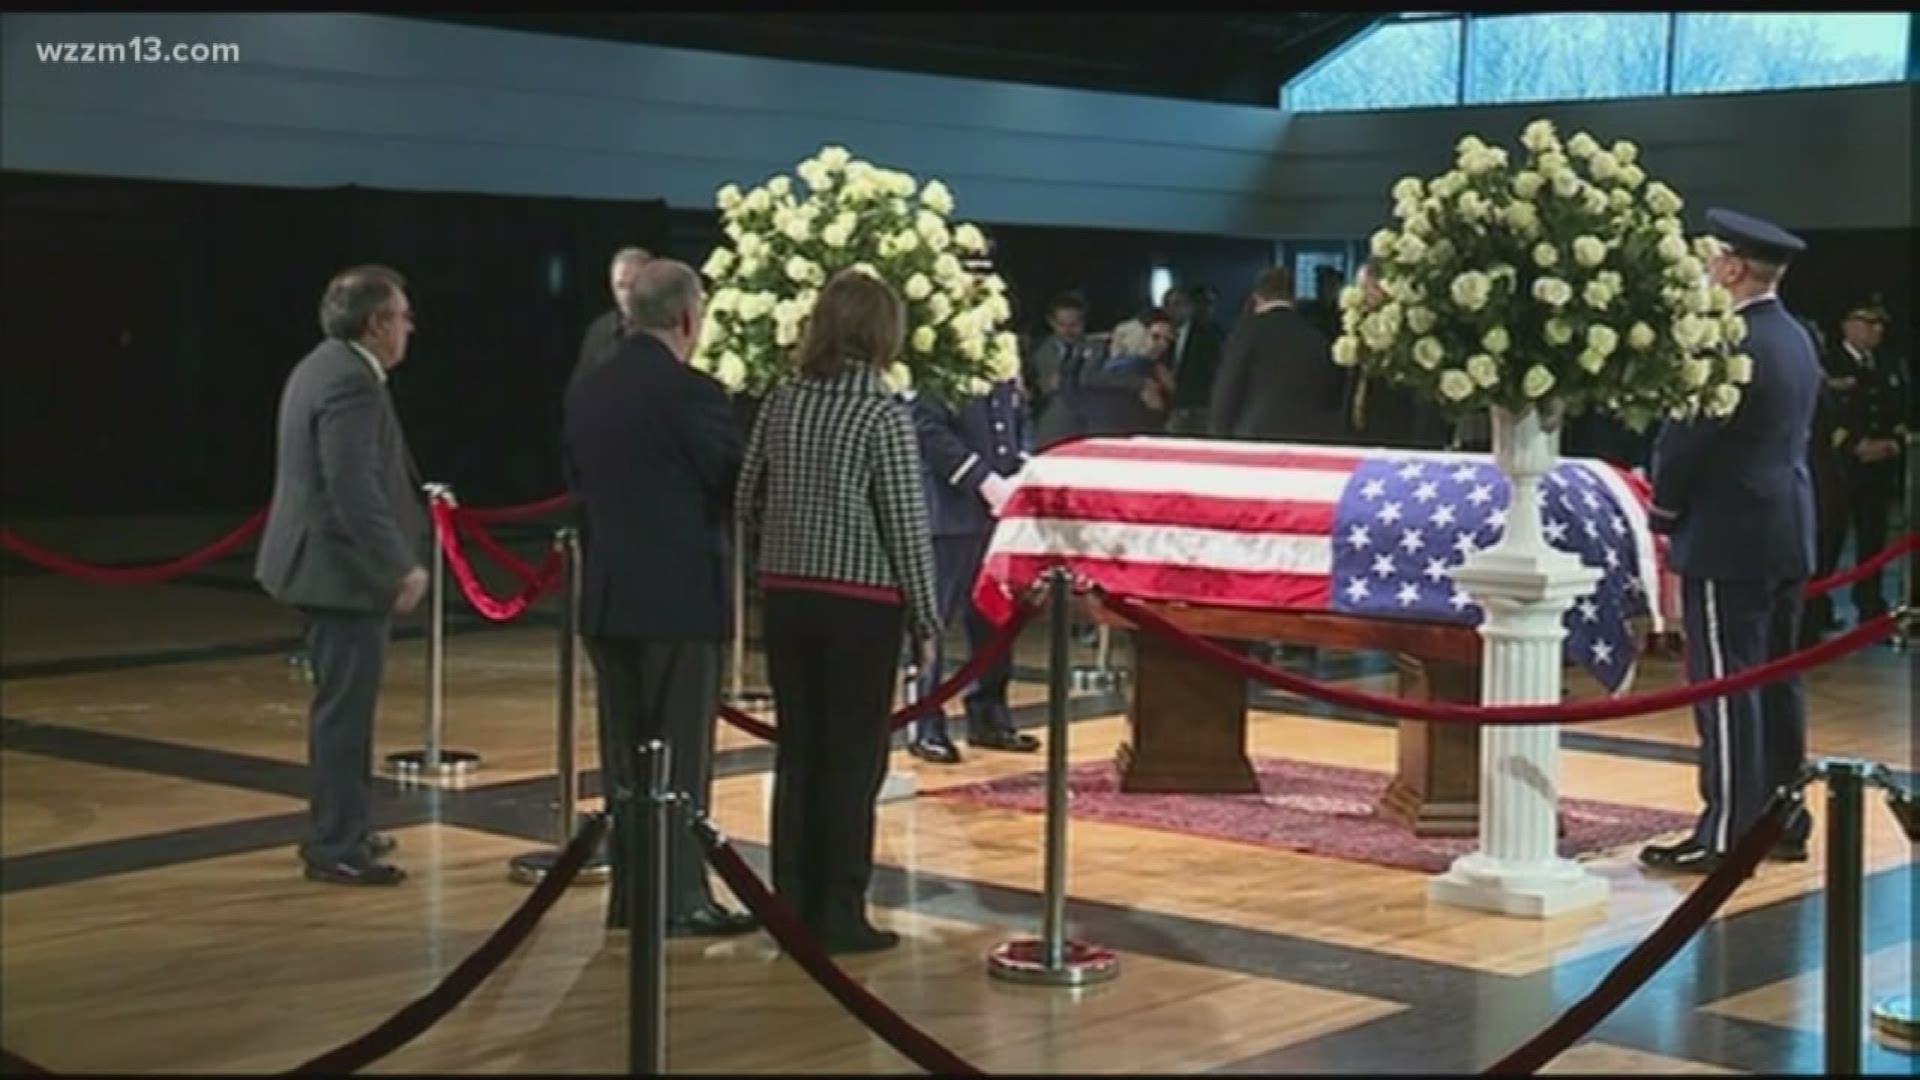 The longest standing U.S. representative's funeral will be held on Tuesday.